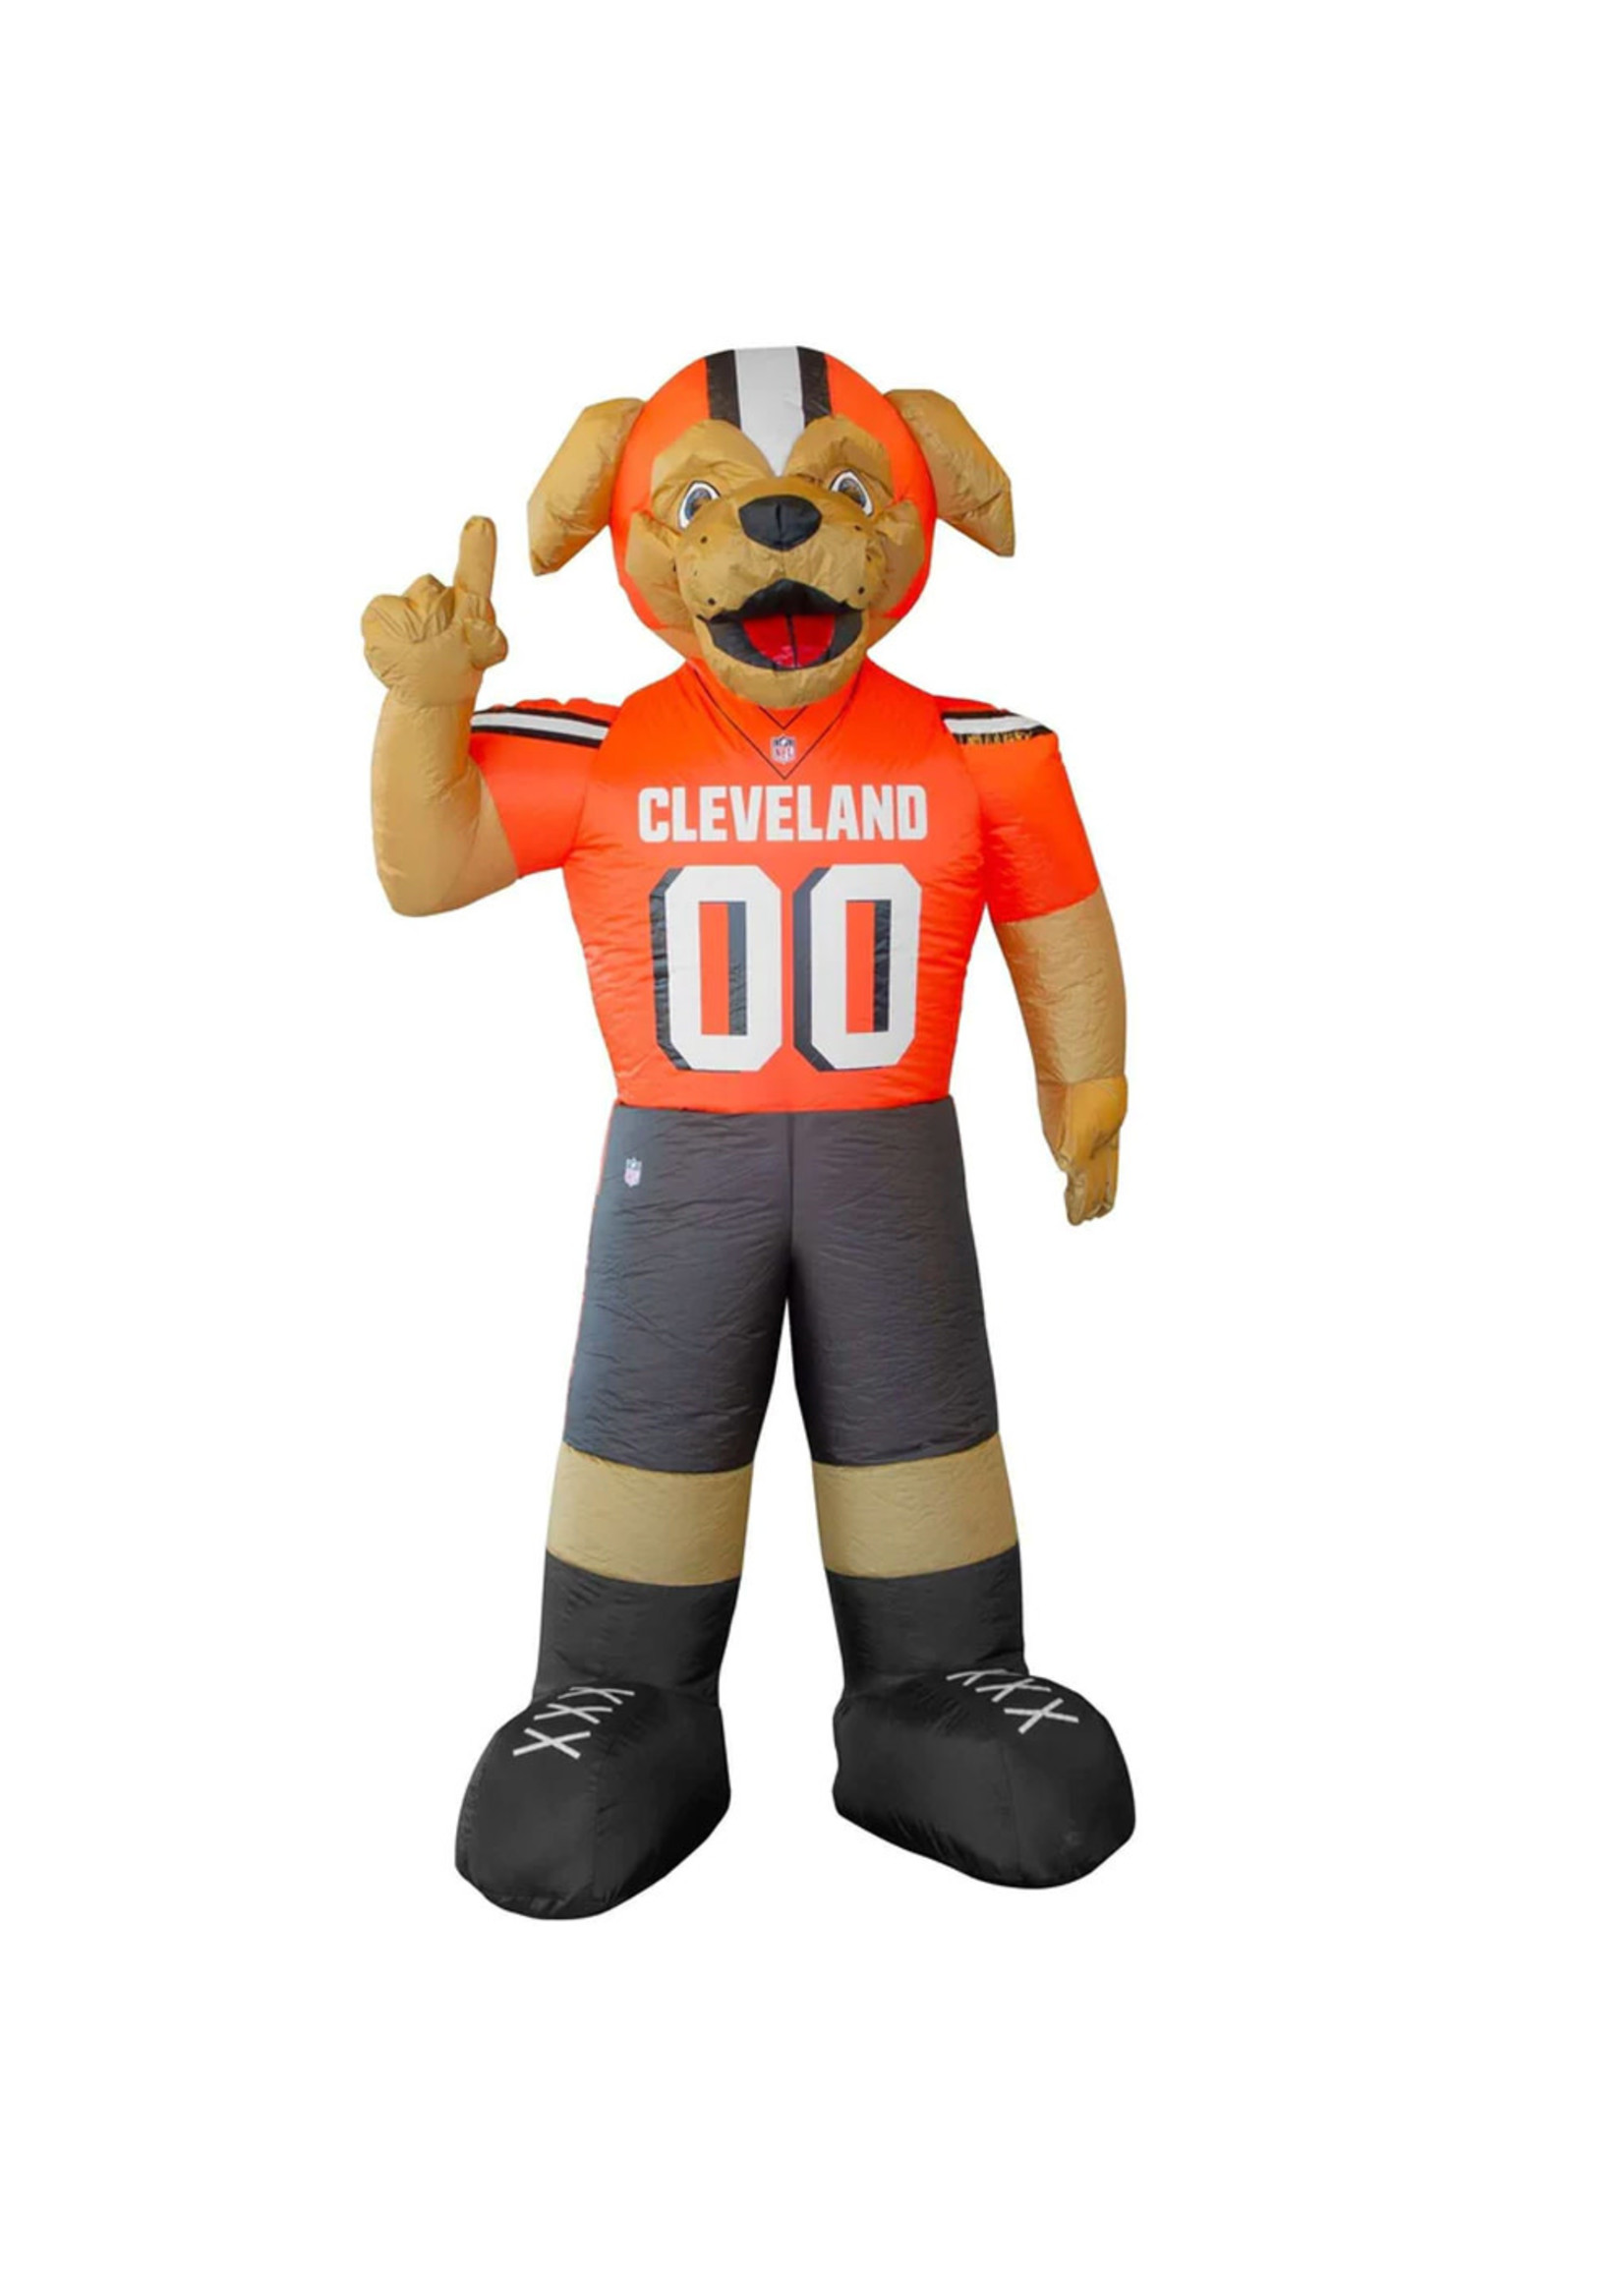 Cleveland Browns Inflatable Mascot -7ft